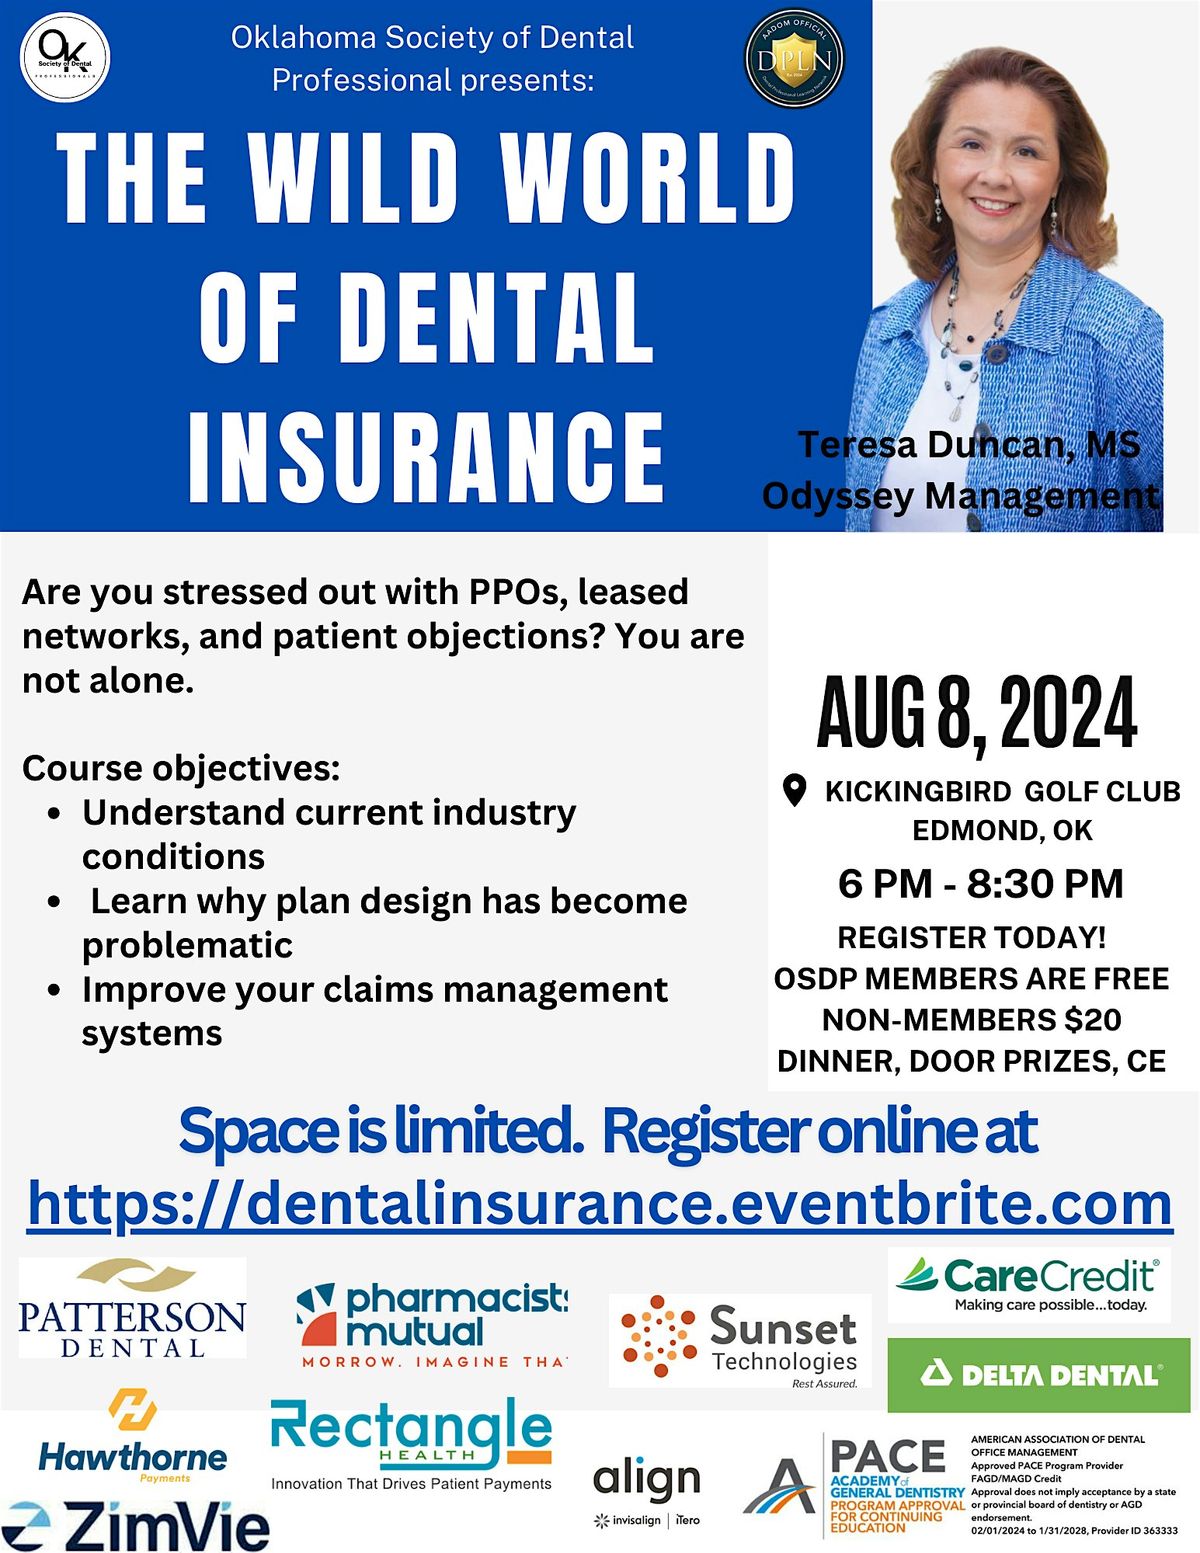 The Wild World of Dental Insurance with Teresa Duncan, MS